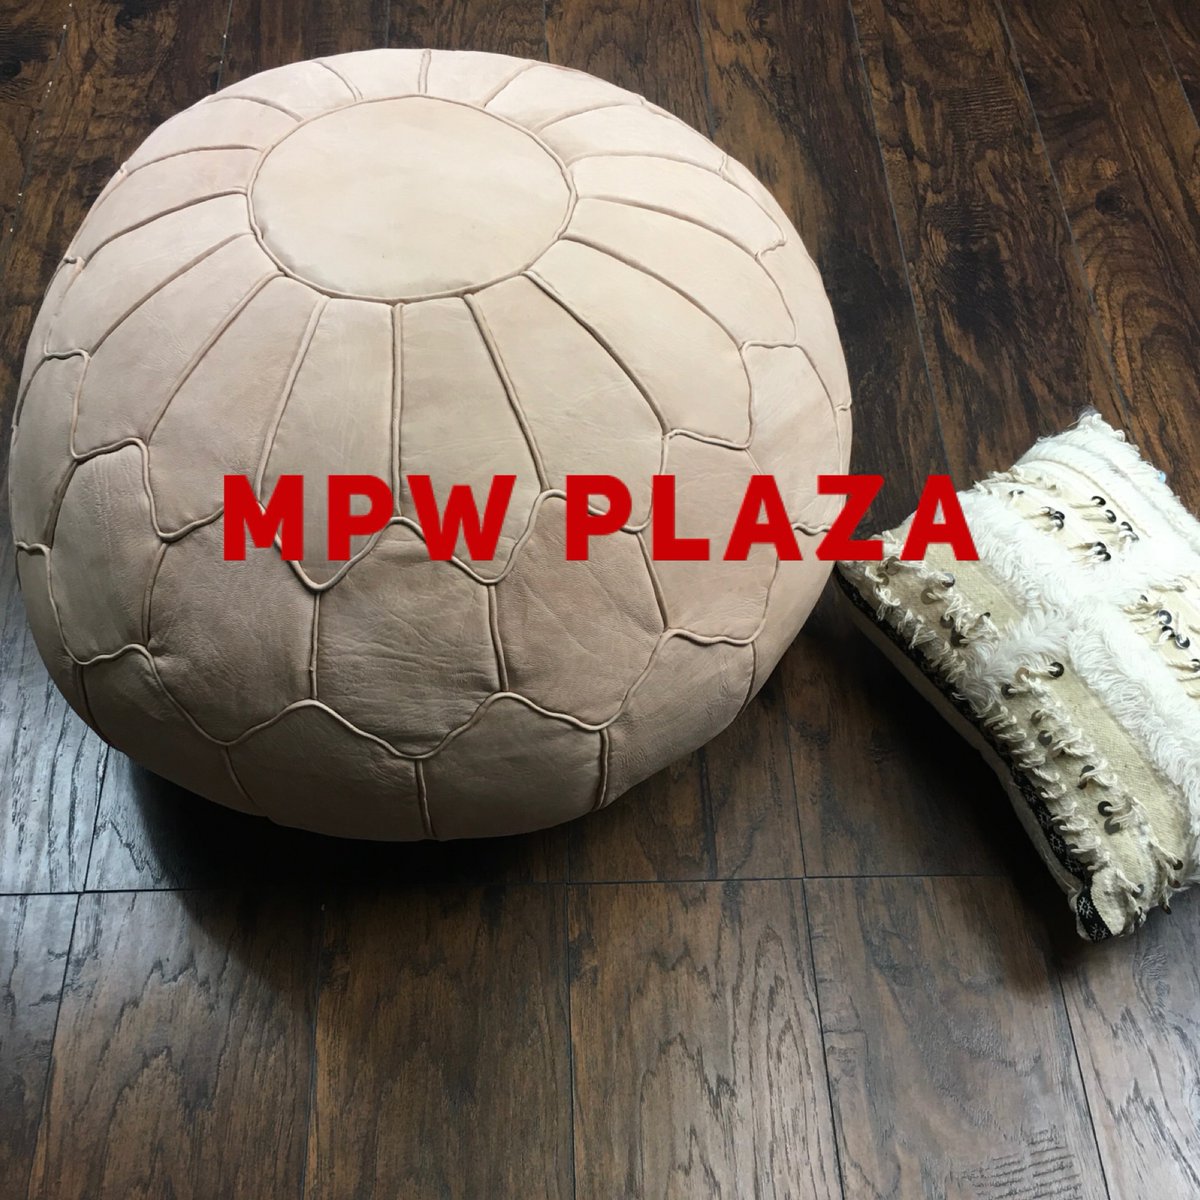 🌺 Treat yourself to a Premium MPW Plaza Moroccan Pouf 🌺  ships from USA 🌹
#luxuryhouses #luxurylifestyles #luxurygirl #luxurylivingroom #luxurystyle #luxuryapartments #luxuryshopping #luxuryshoes #luxurybags #luxurycollection #luxurycondos #luxurymansion #luxuryproperty